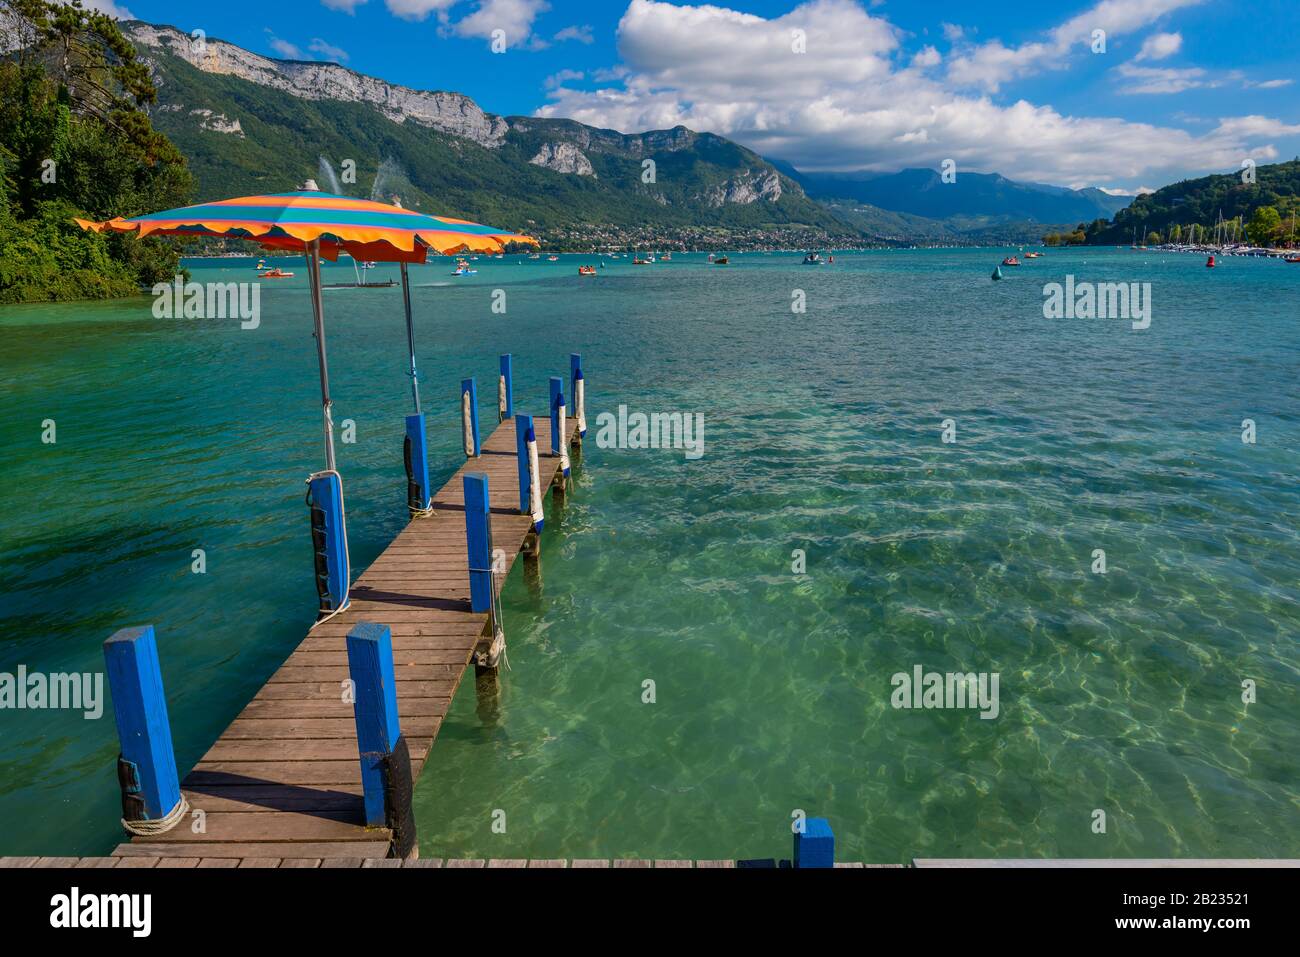 A jetty and pedal boats on Lake Annecy, one of the largest lakes in France known as the cleanest lake in Europe, viewed from Jardins de l'Europe park. Stock Photo